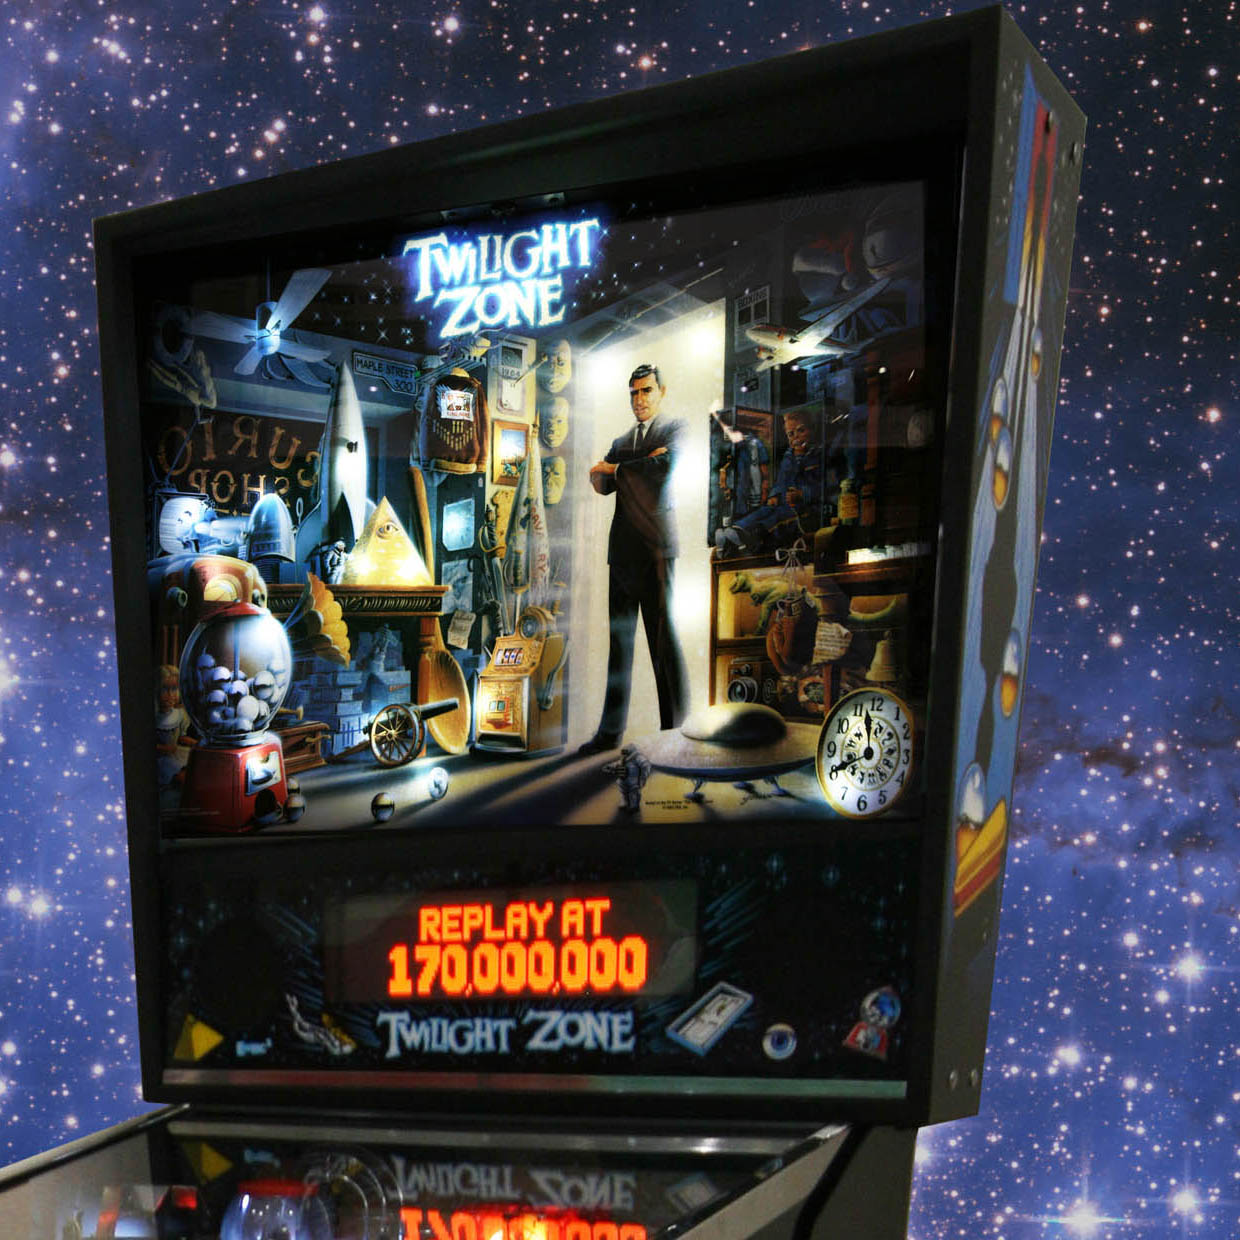 The Twilight Zone Pinball table is out of this world!